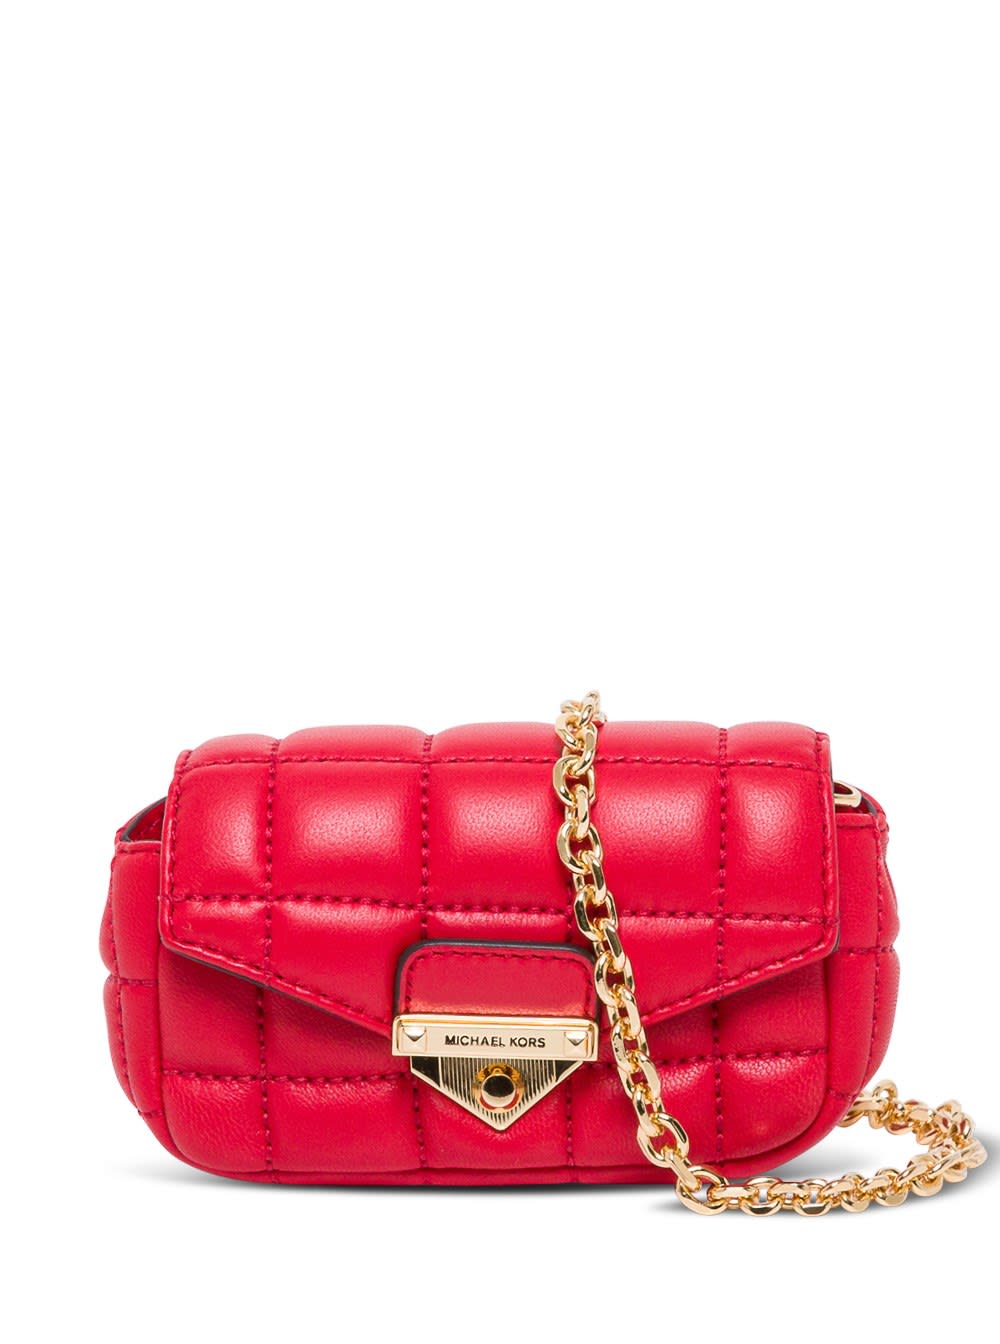 Michael Kors Soho Quilted Leather Bag Charm